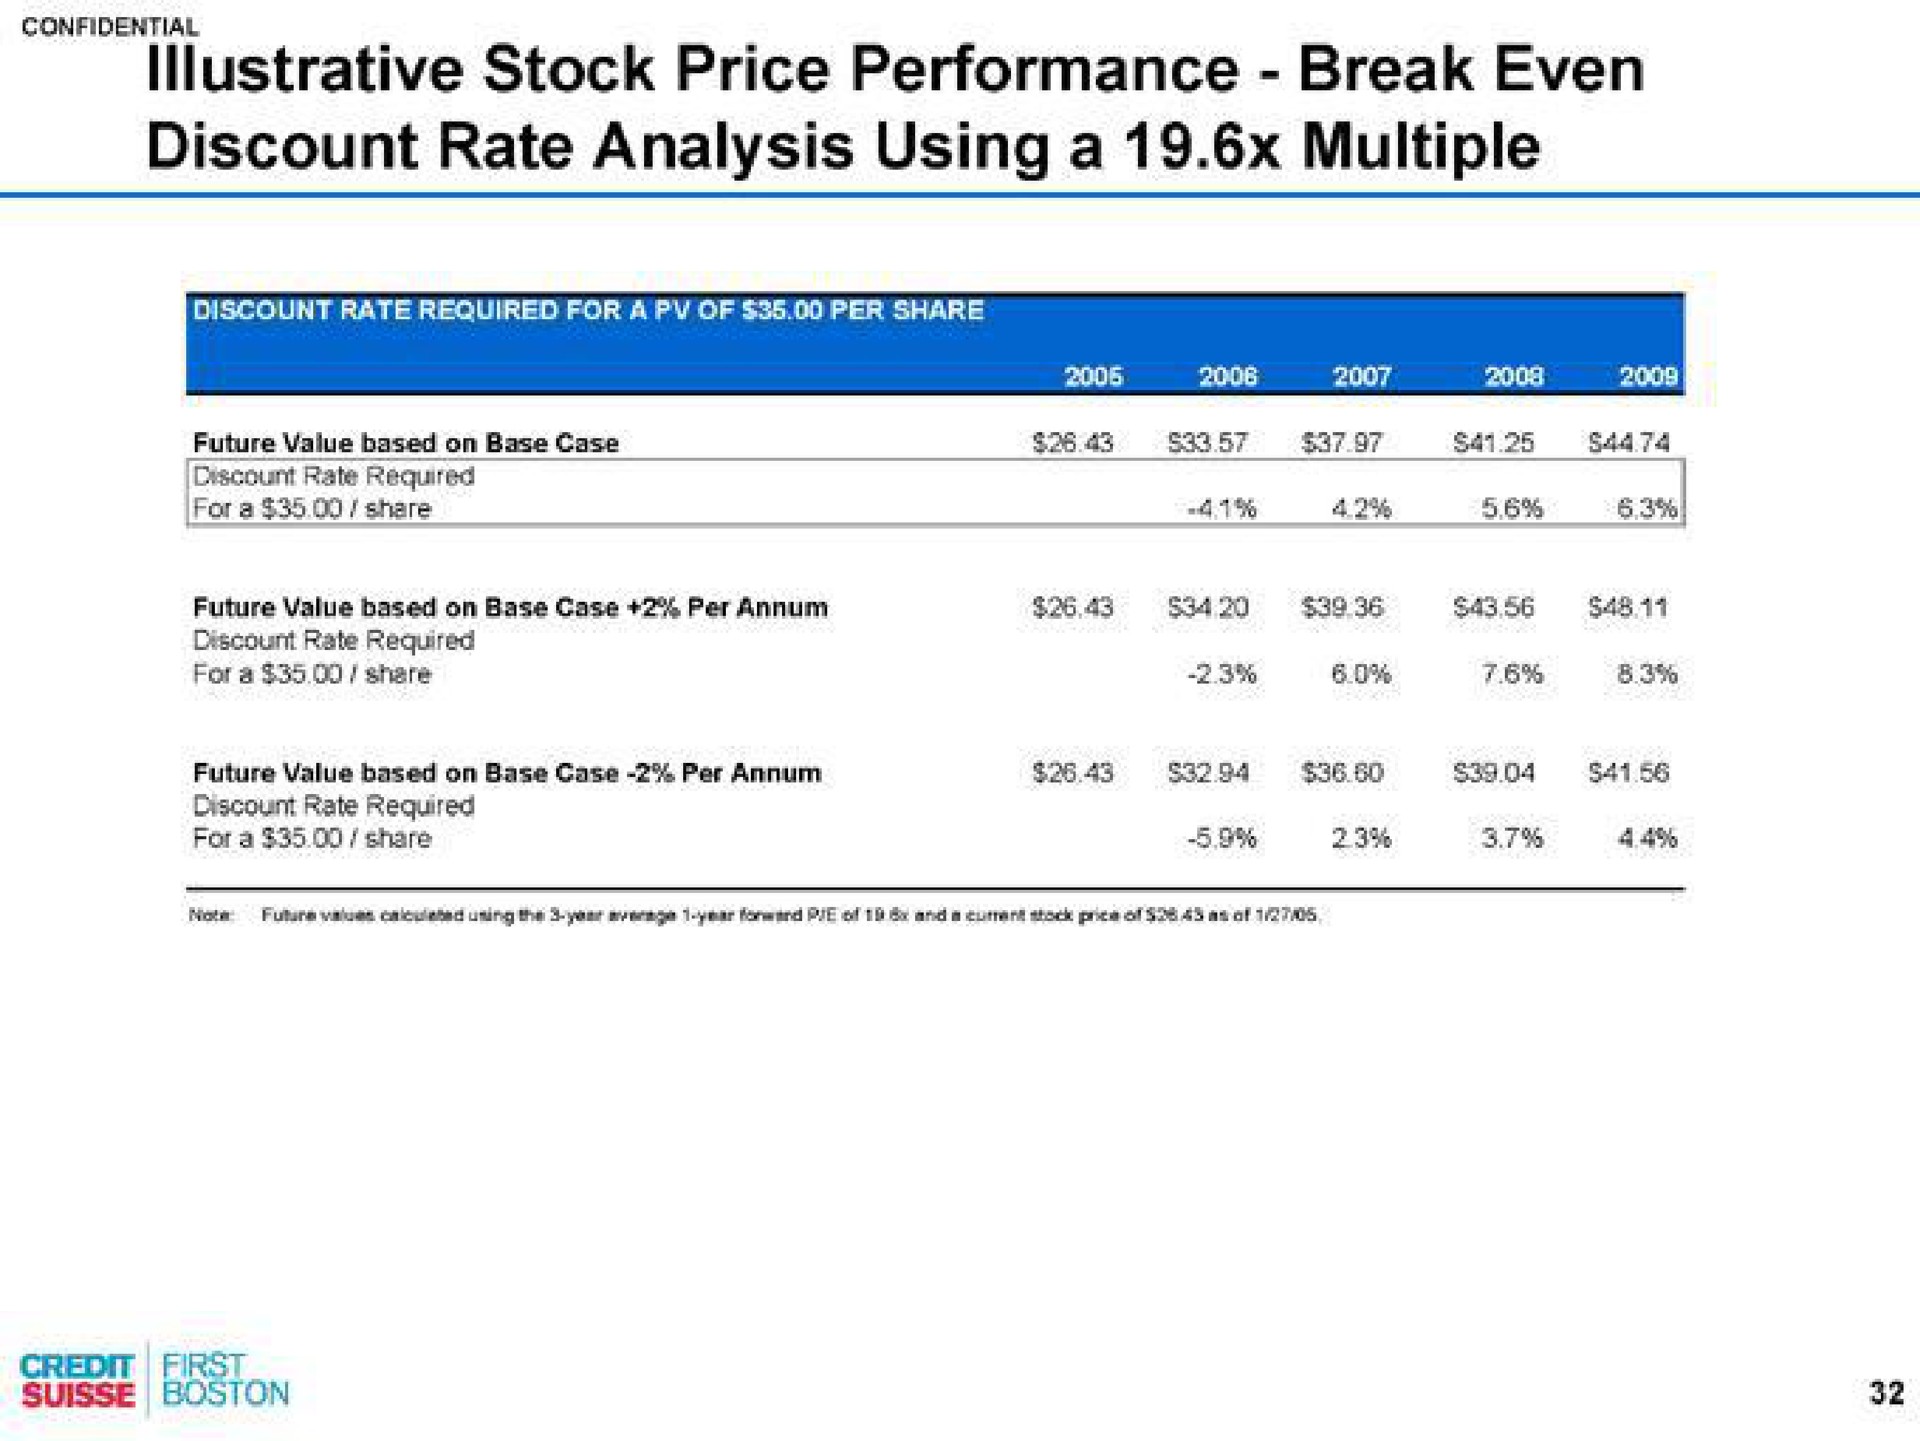 illustrative stock price performance break even discount rate analysis using a multiple | Credit Suisse